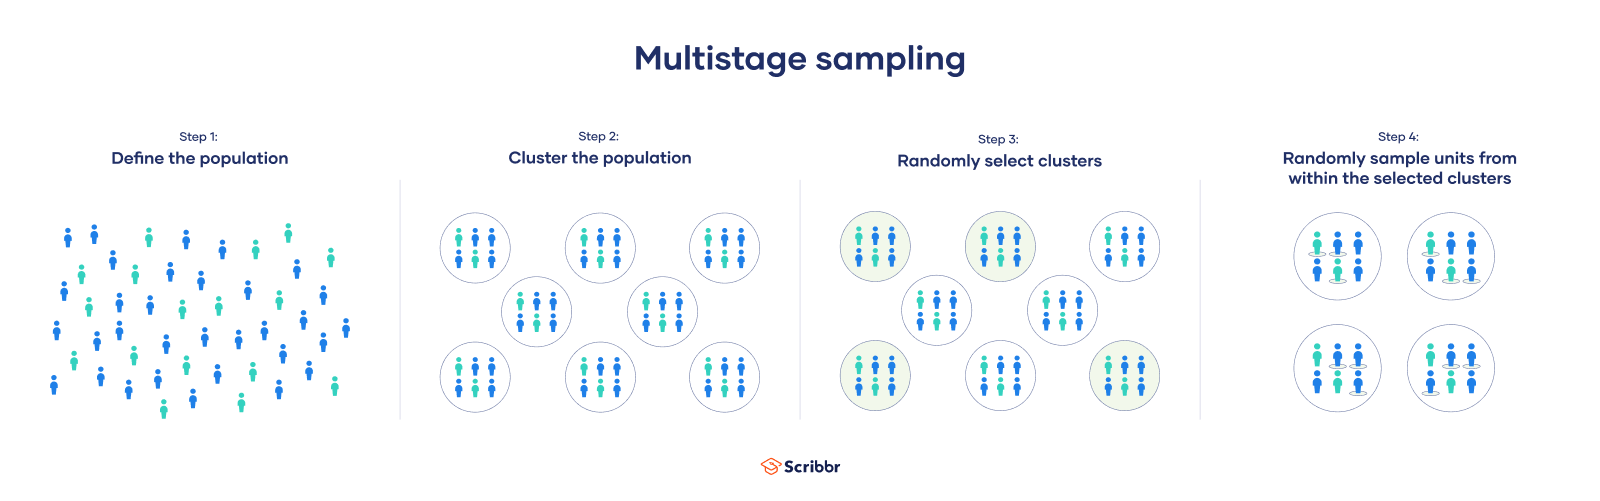 <ul><li><p><mark data-color="yellow">Combination of multiple sampling methods</mark></p></li><li><p>you draw a sample from a population using smaller and smaller groups at each stage</p></li><li><p>used when the population is very large</p></li></ul><p>commonly</p><p>startified → systematic</p><p>clustered → systematic</p>